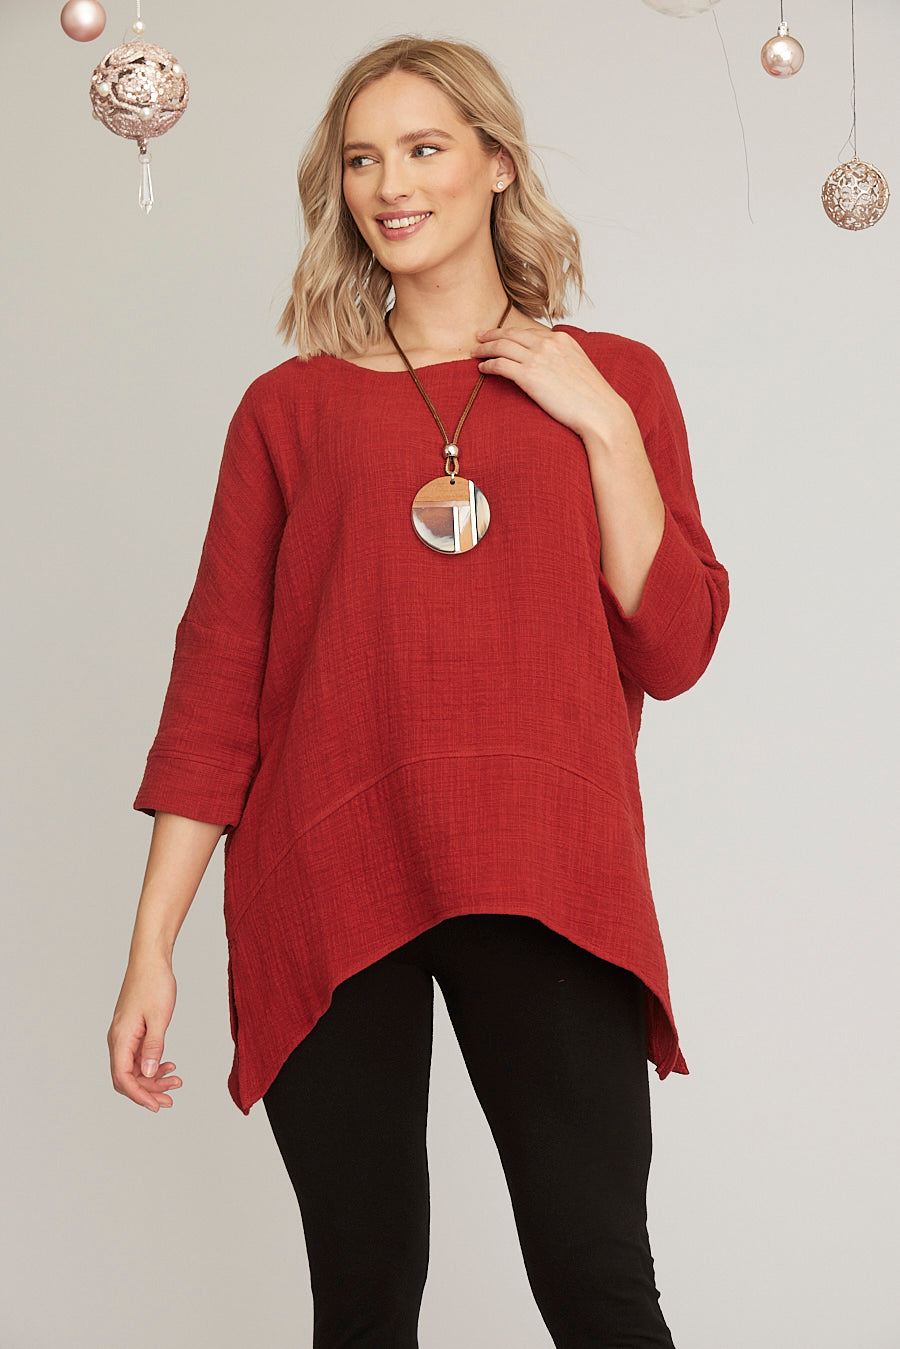 Saloos Soft Cotton Texture Top with Necklace